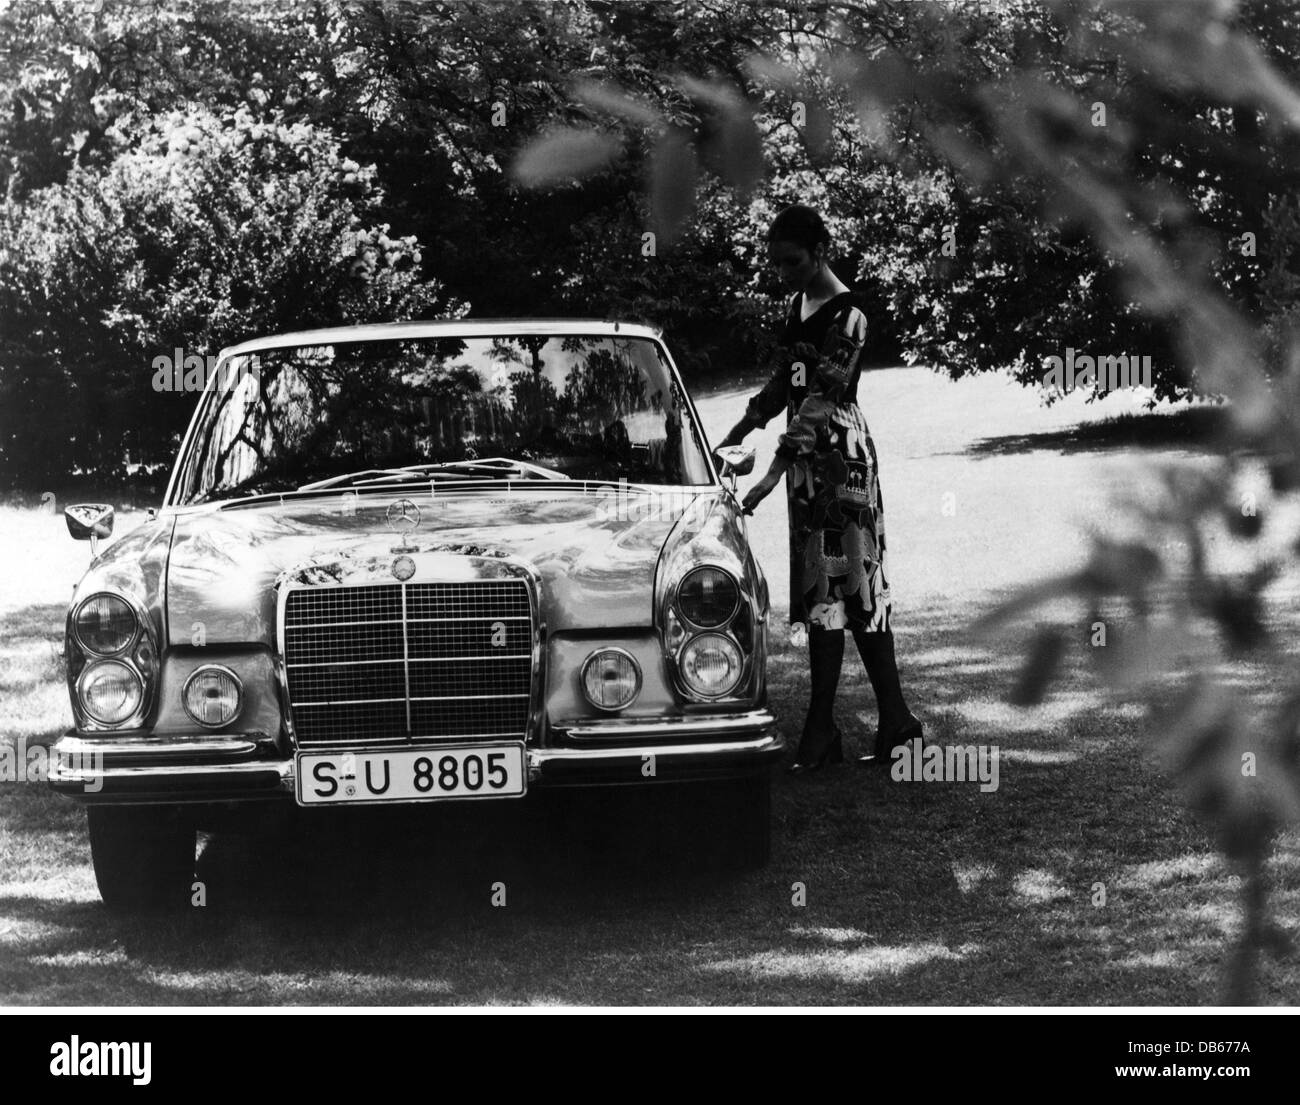 transport / transportation, cars, Mercedes-Benz 280 SE, circa 1970, Additional-Rights-Clearences-Not Available Stock Photo